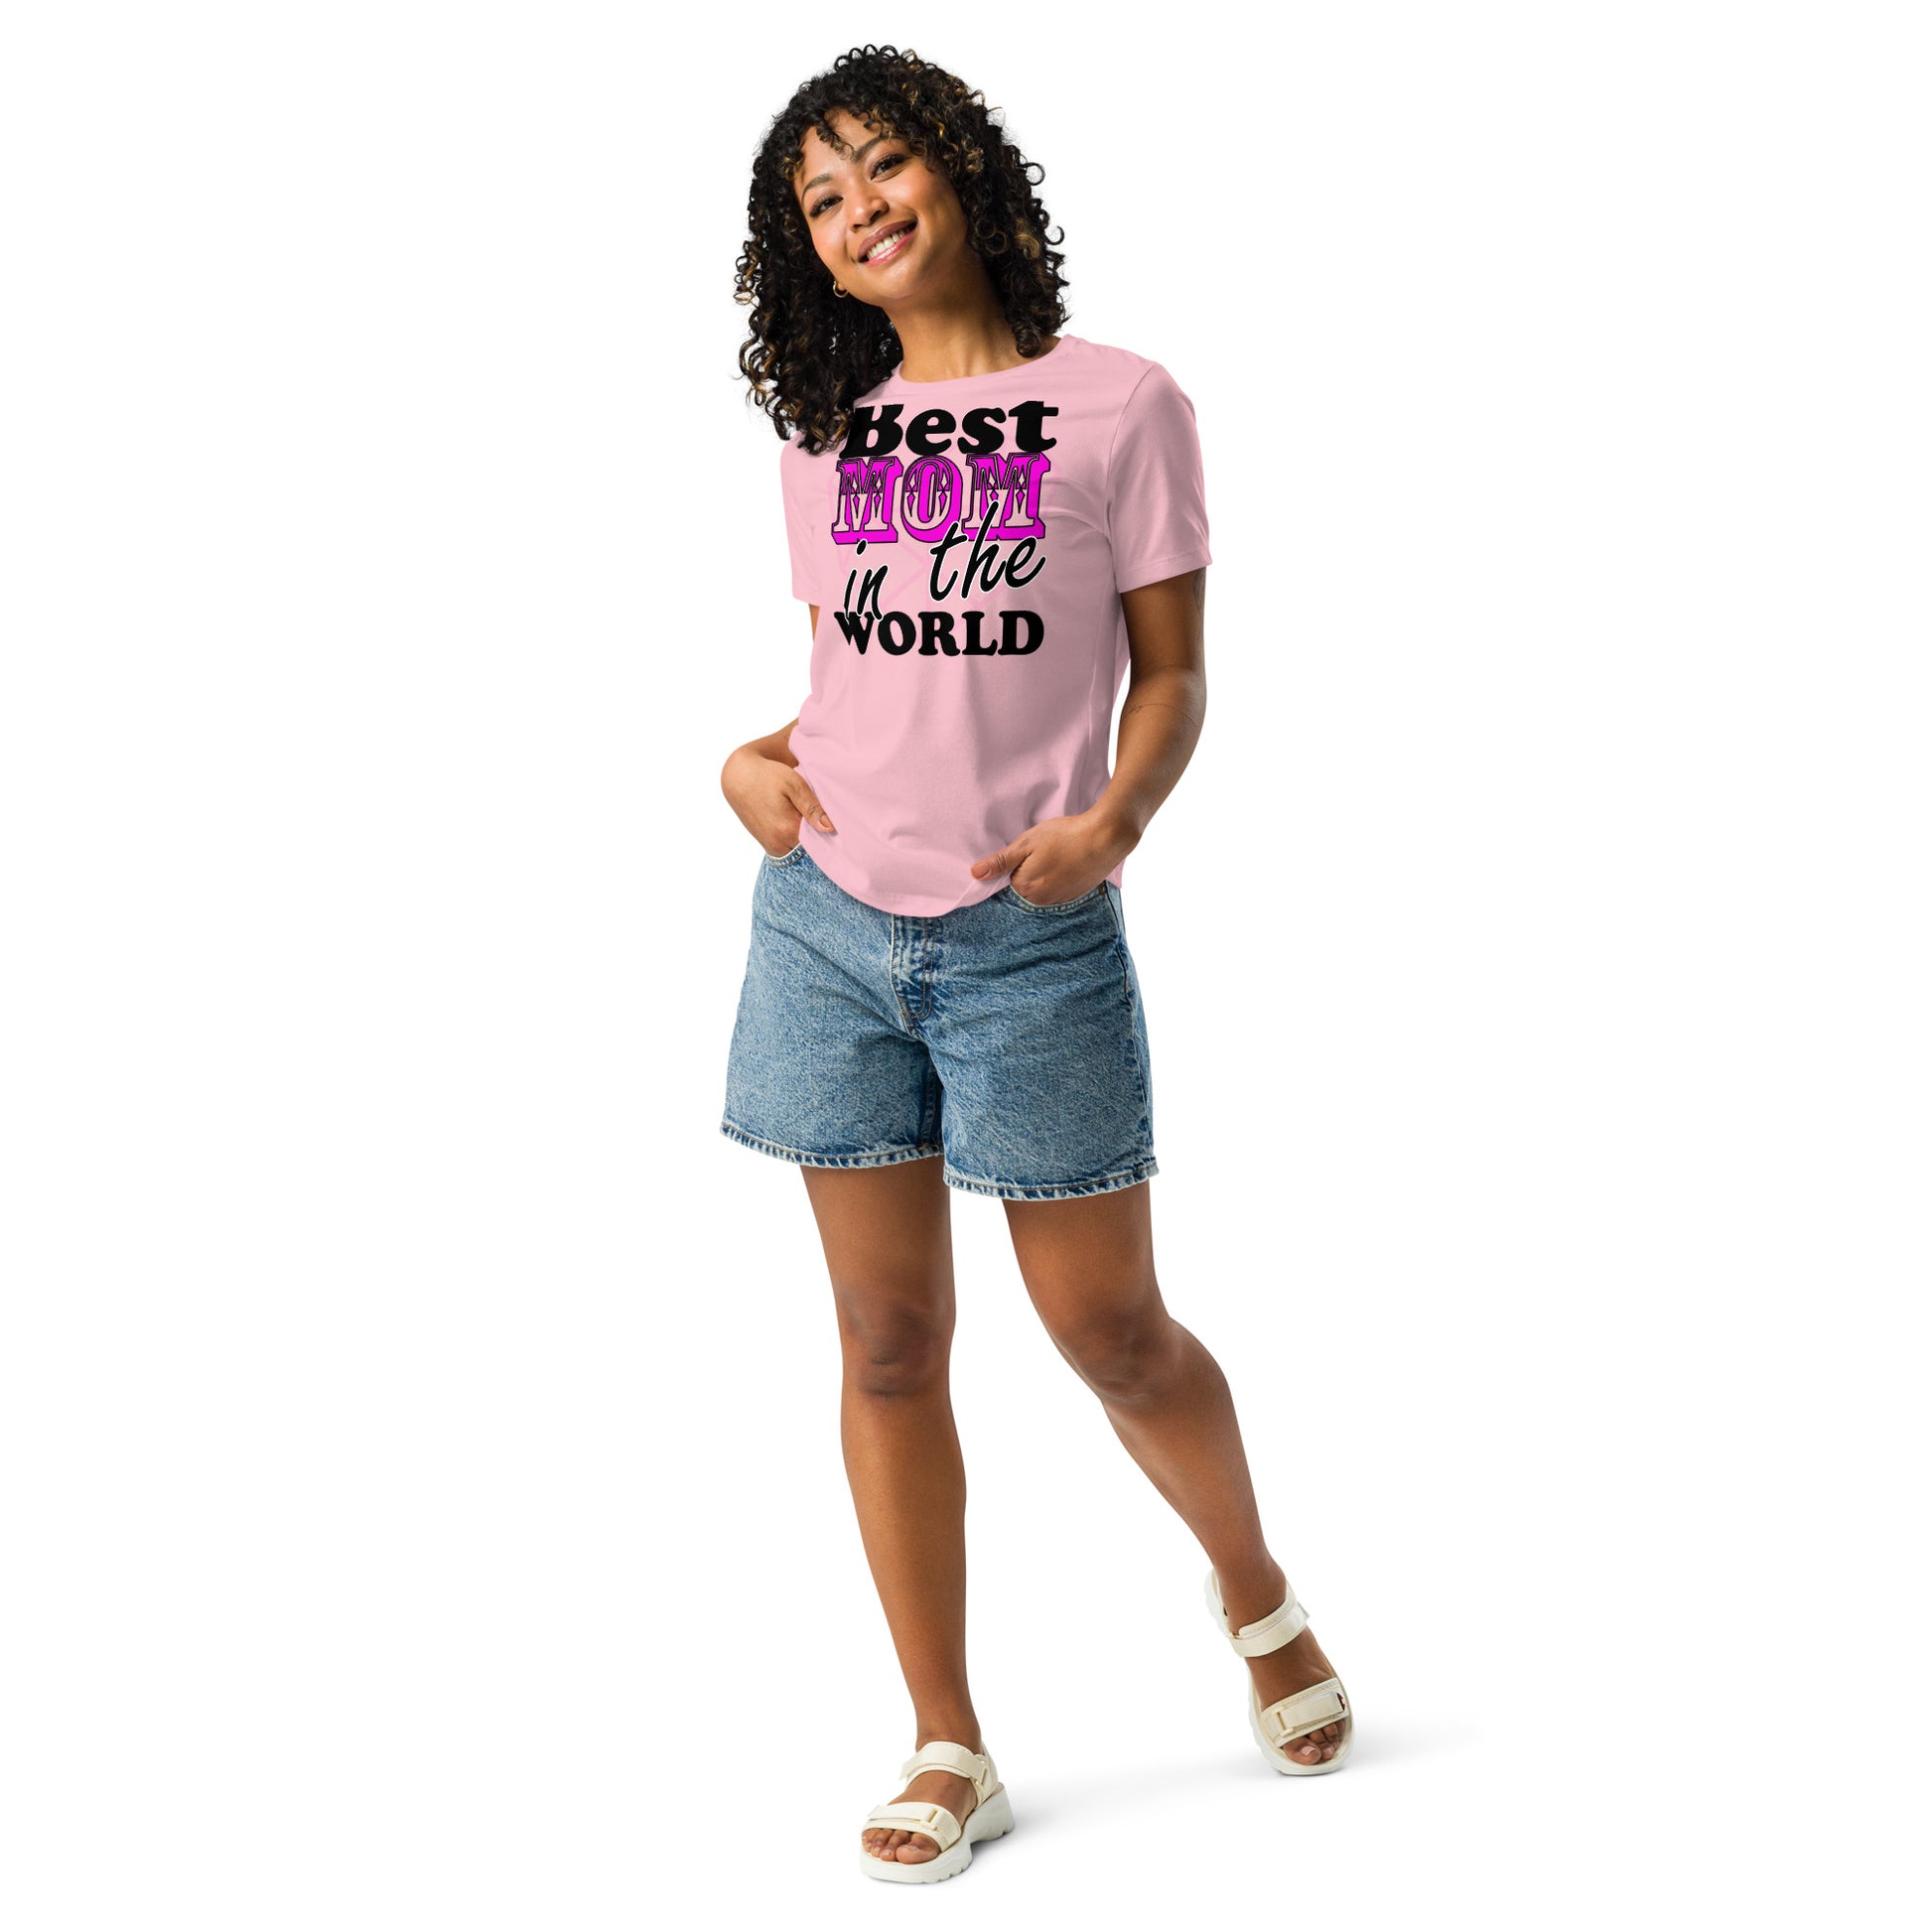 Women with T-shirt Pink color with the text "Best MOM in the world"